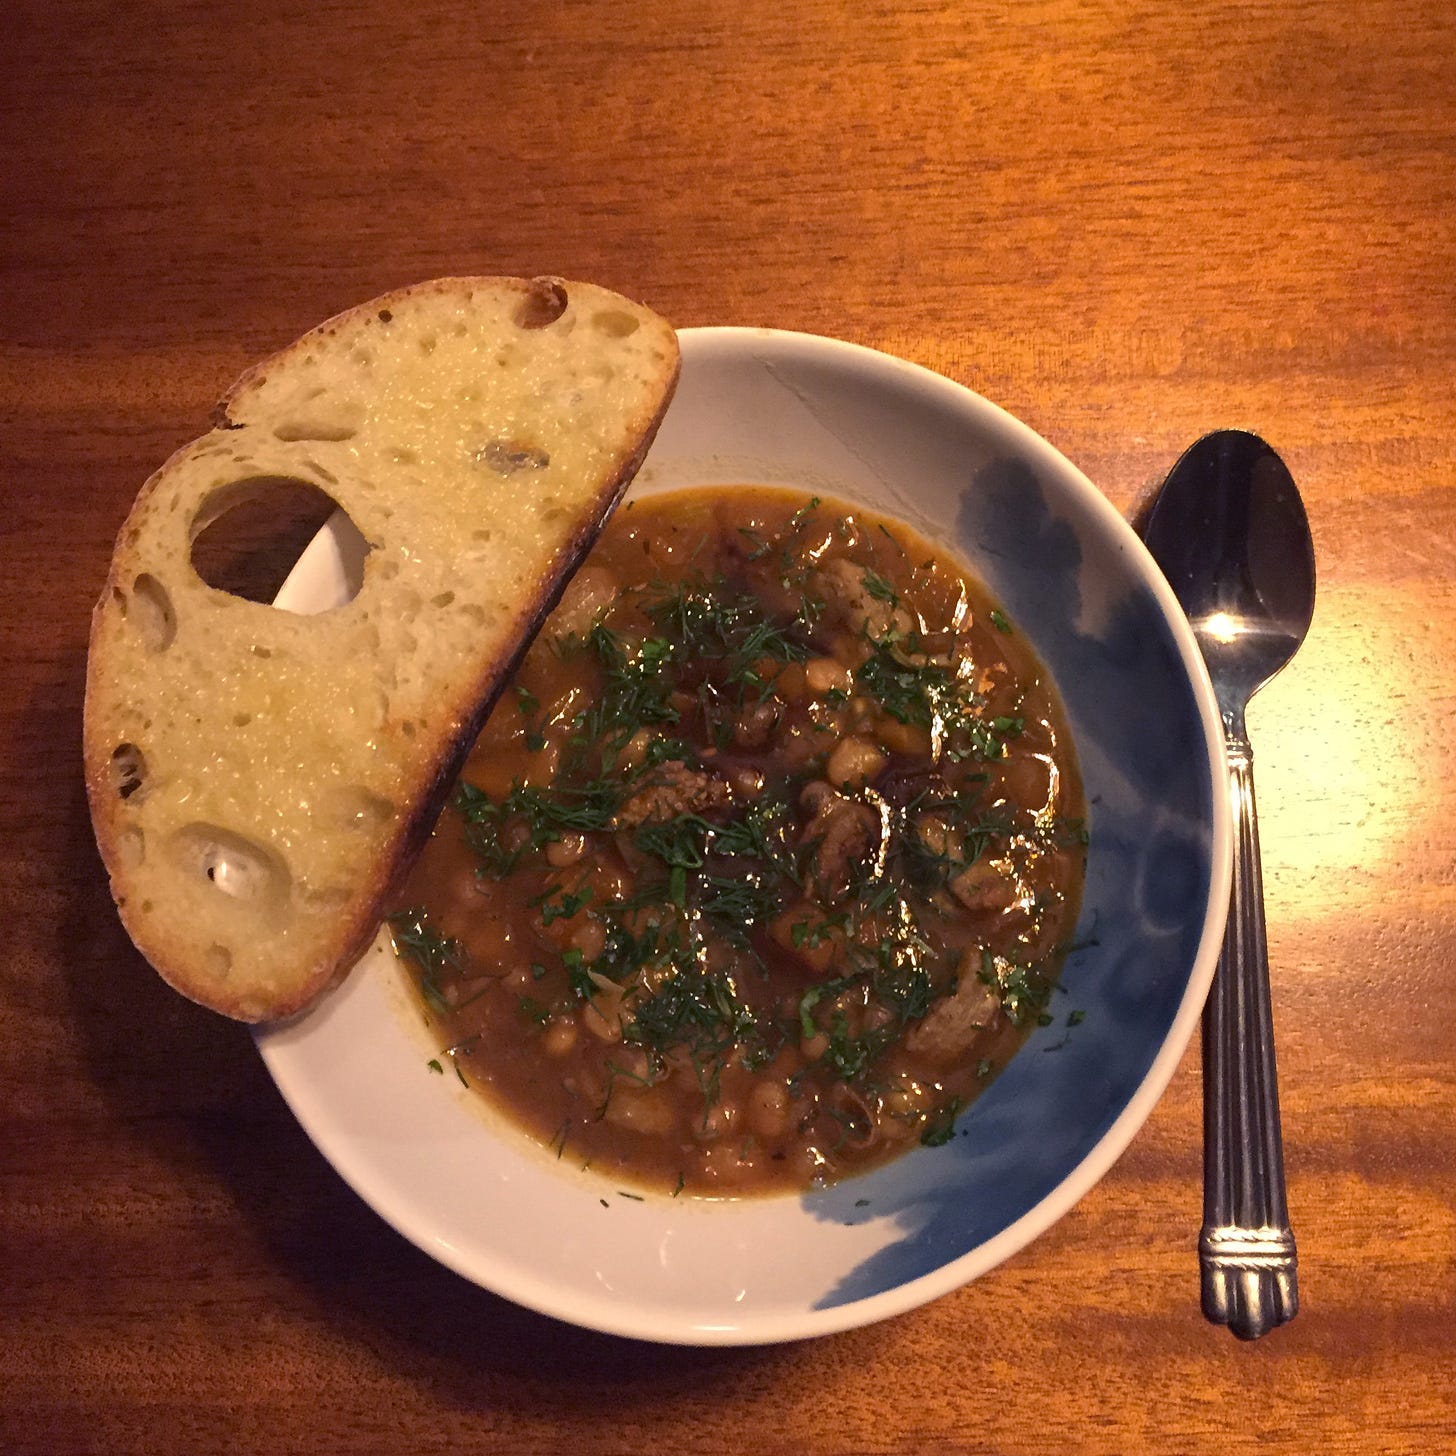 From above, a bowl of bean stew sprinkled with herbs, with a slice of sourdough resting on the edge of the bowl and a spoon on the table beside it.